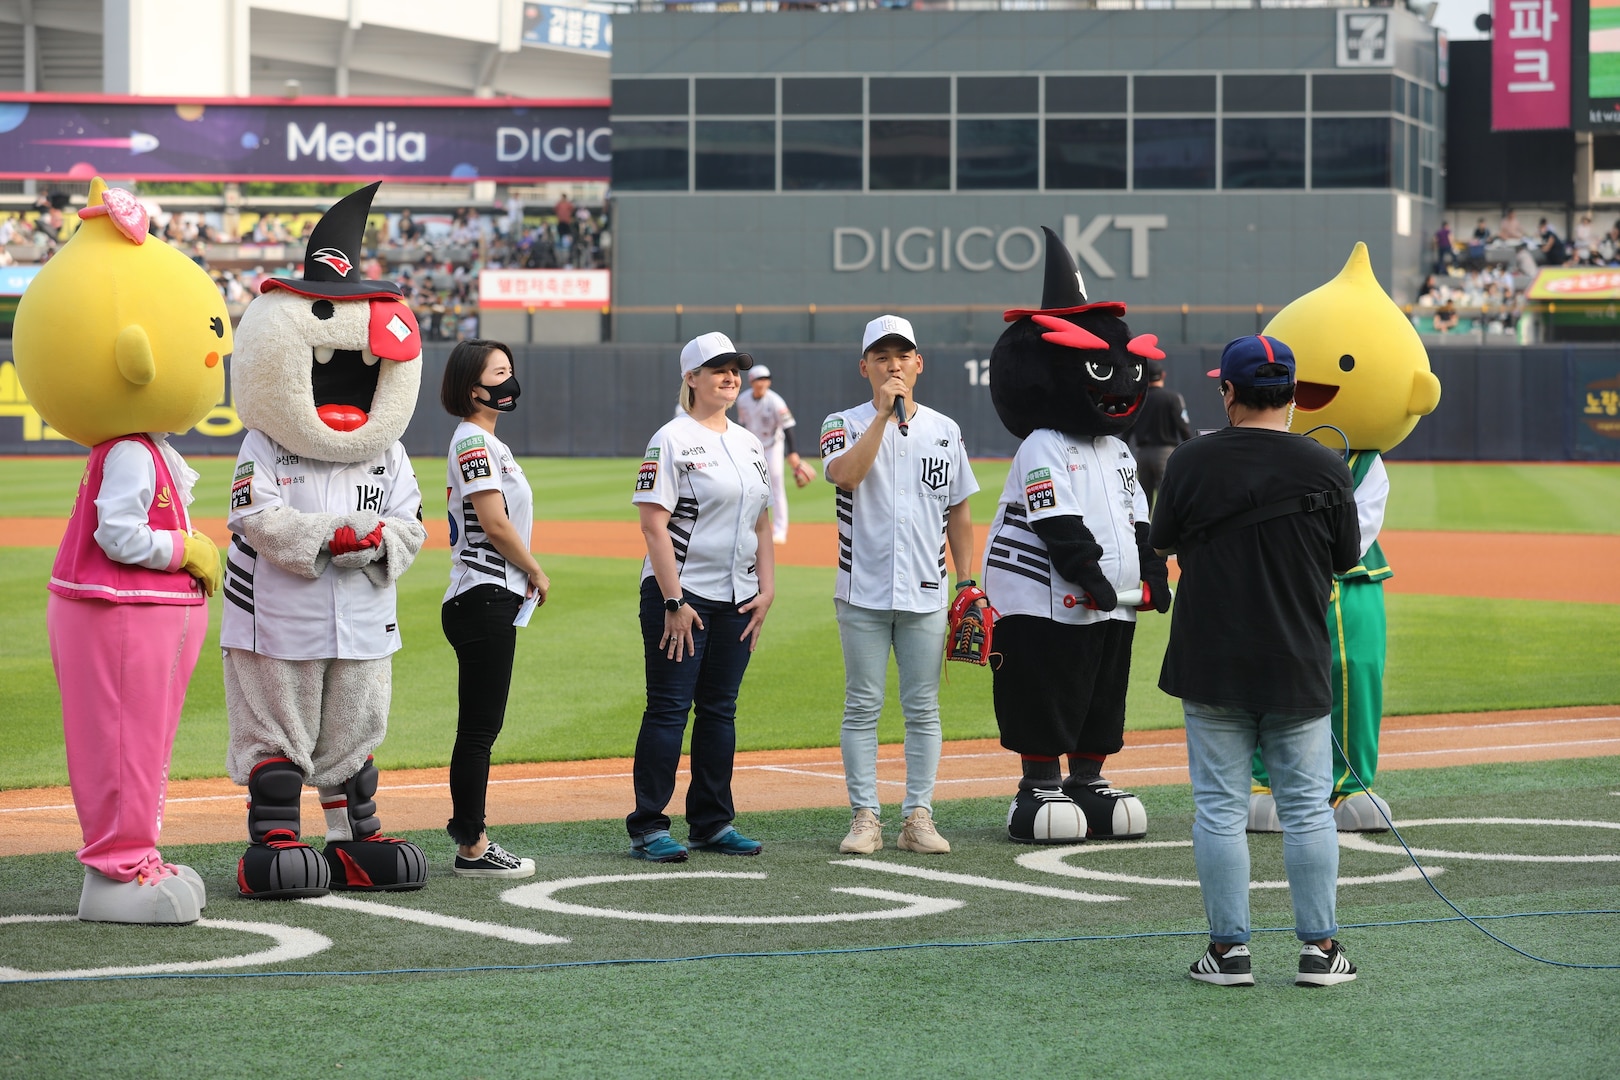 Lt. Col. Miranda Killingsworth and Capt. (P) Ji Sang-gon will serve as the honorary batter and pitcher during a baseball game at KT Wiz Park between the Suwon-KT Wiz and LG Twins Baseball Club.